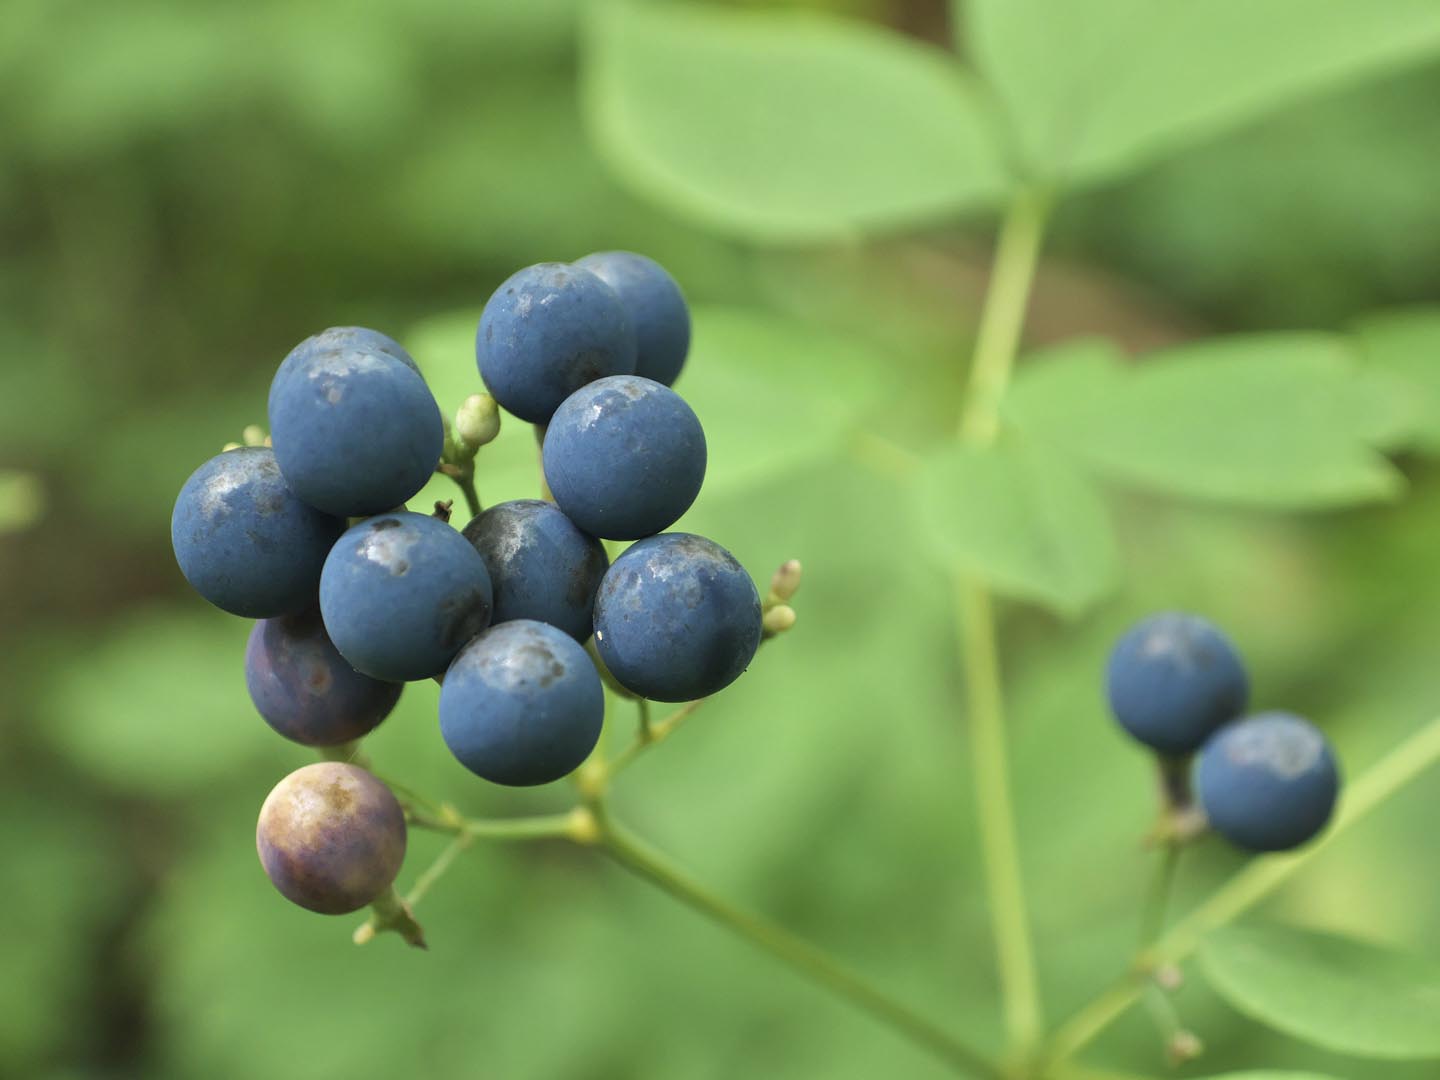 The blue berries of the blue cohosh plant (Caulophyllum calicthroides) wild woodland medicinal plant and herb.